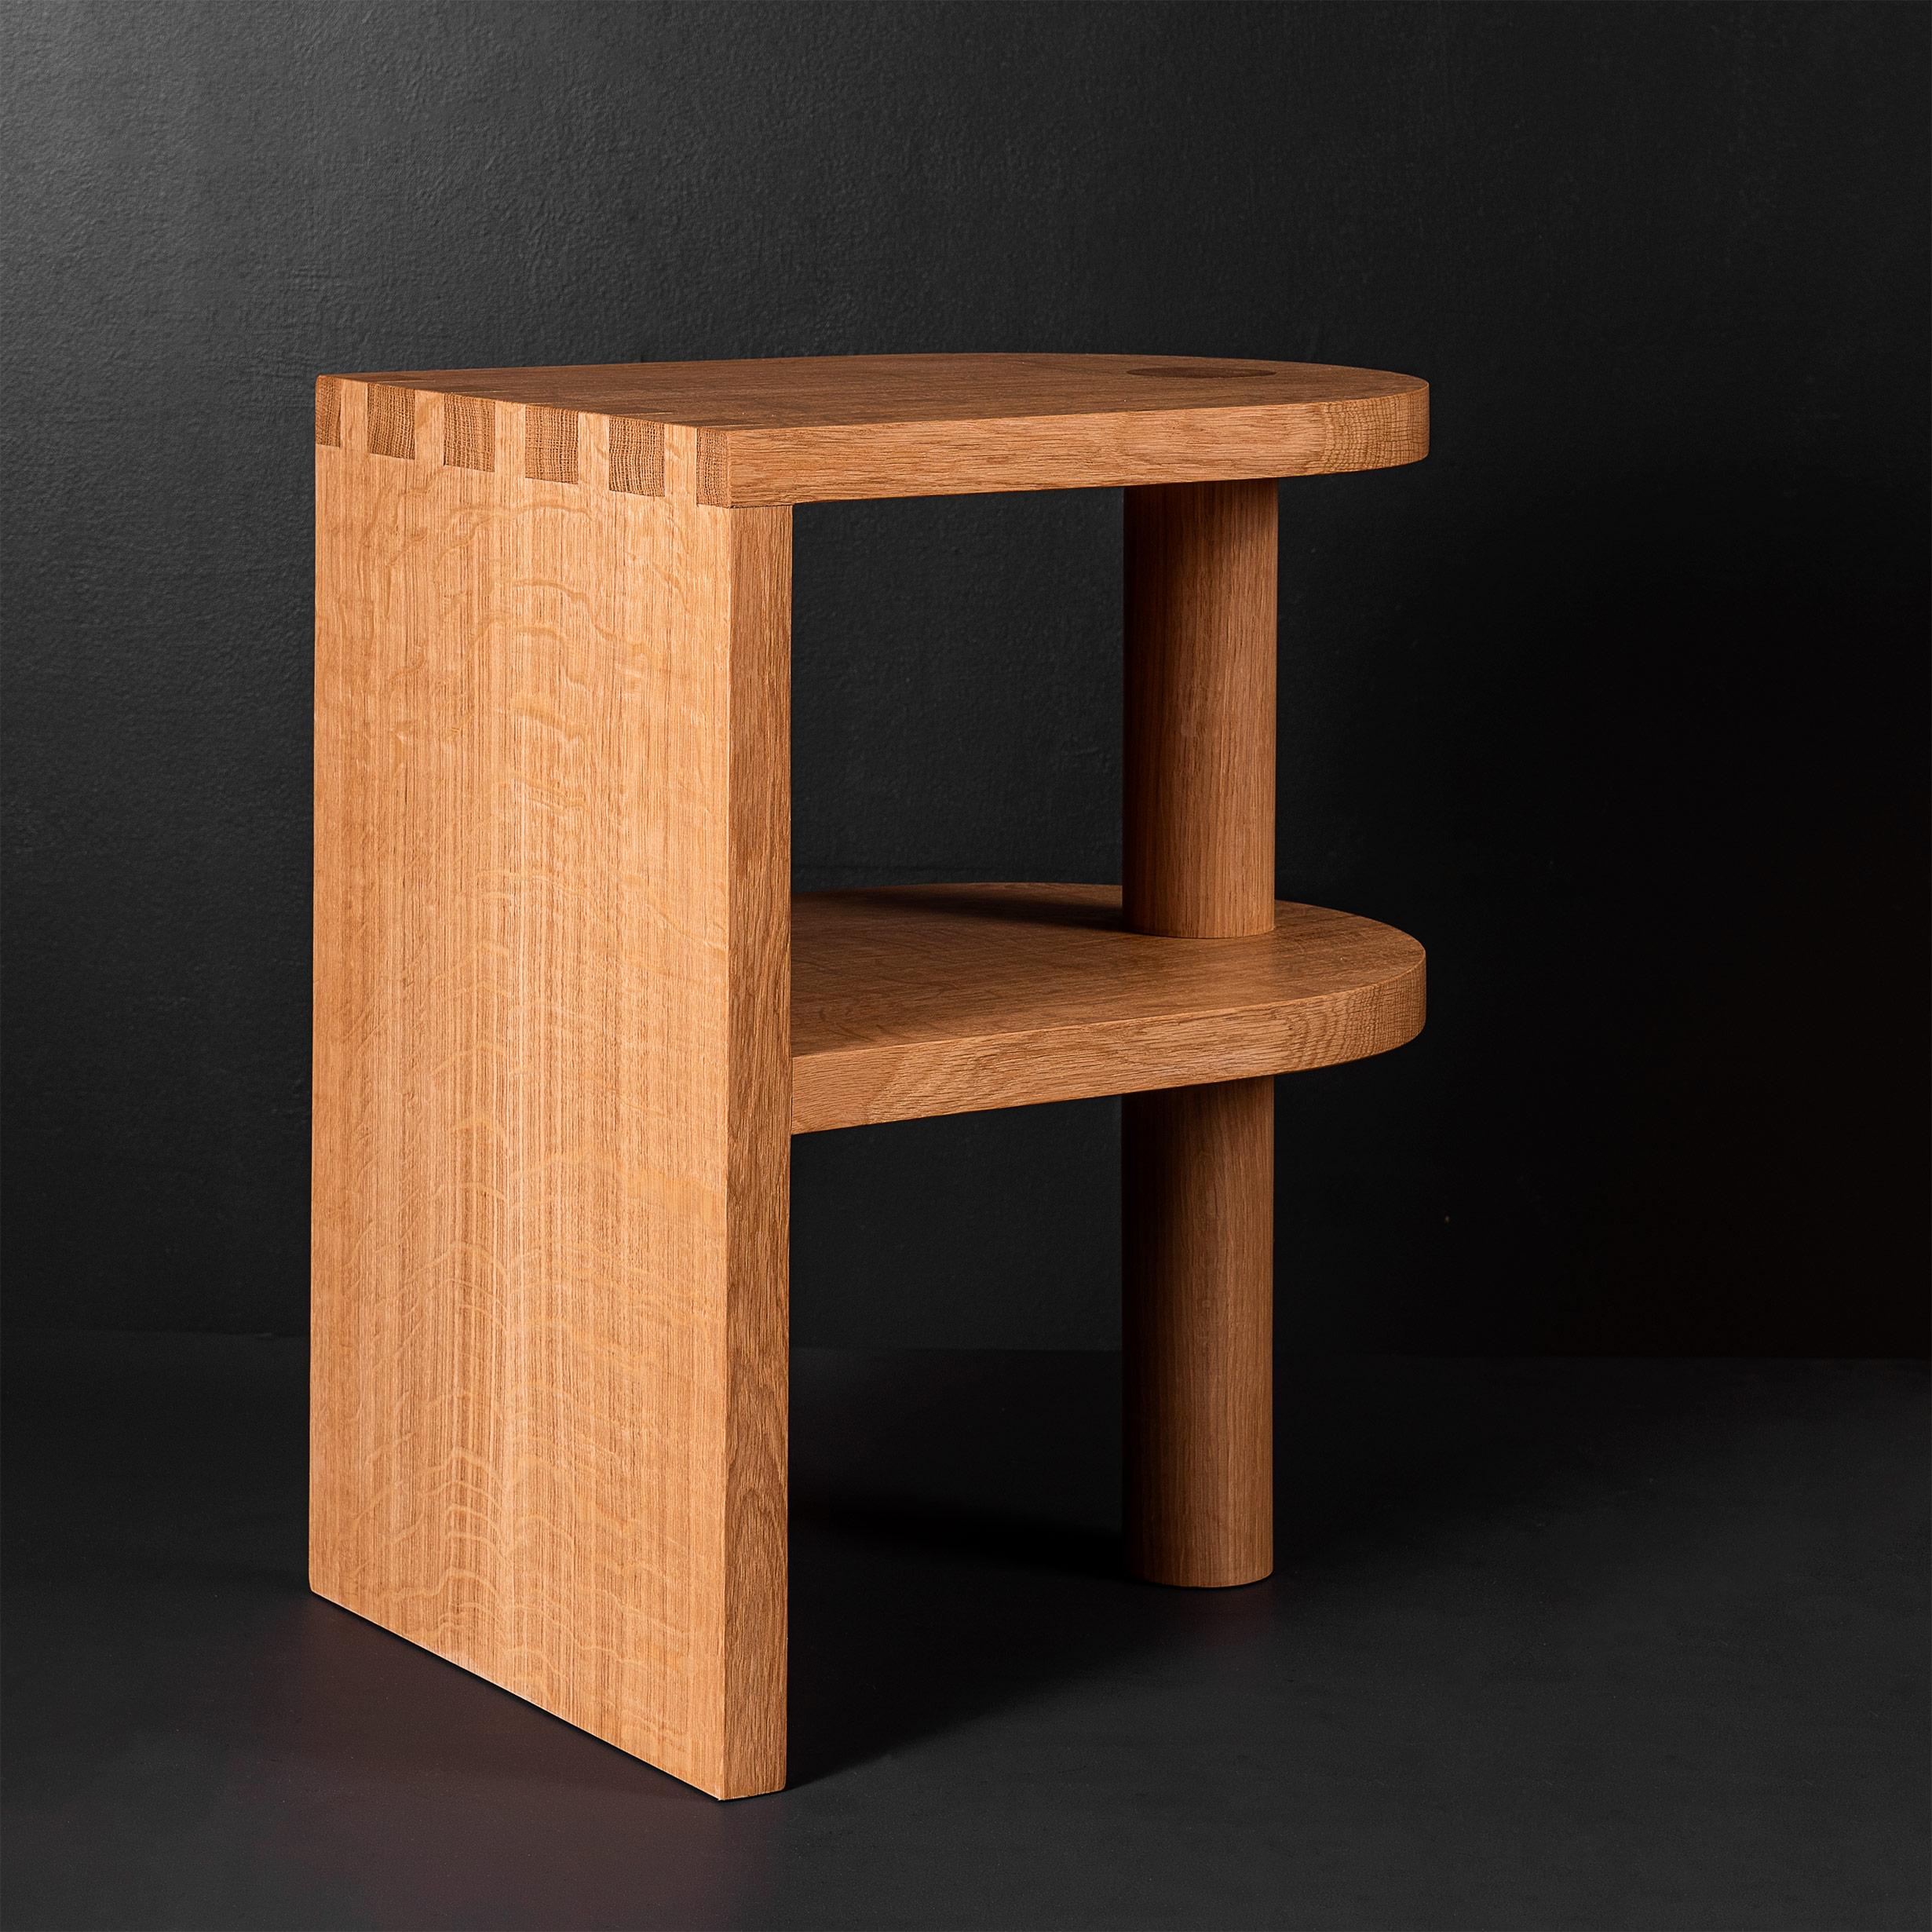 A Larger and adapted version of our architectural postmodern oak pillar nightstands or end tables. Designed and handcrafted in England using traditional woodwork techniques with the most beautiful and finest English quartersawn oak. Hand-cut large